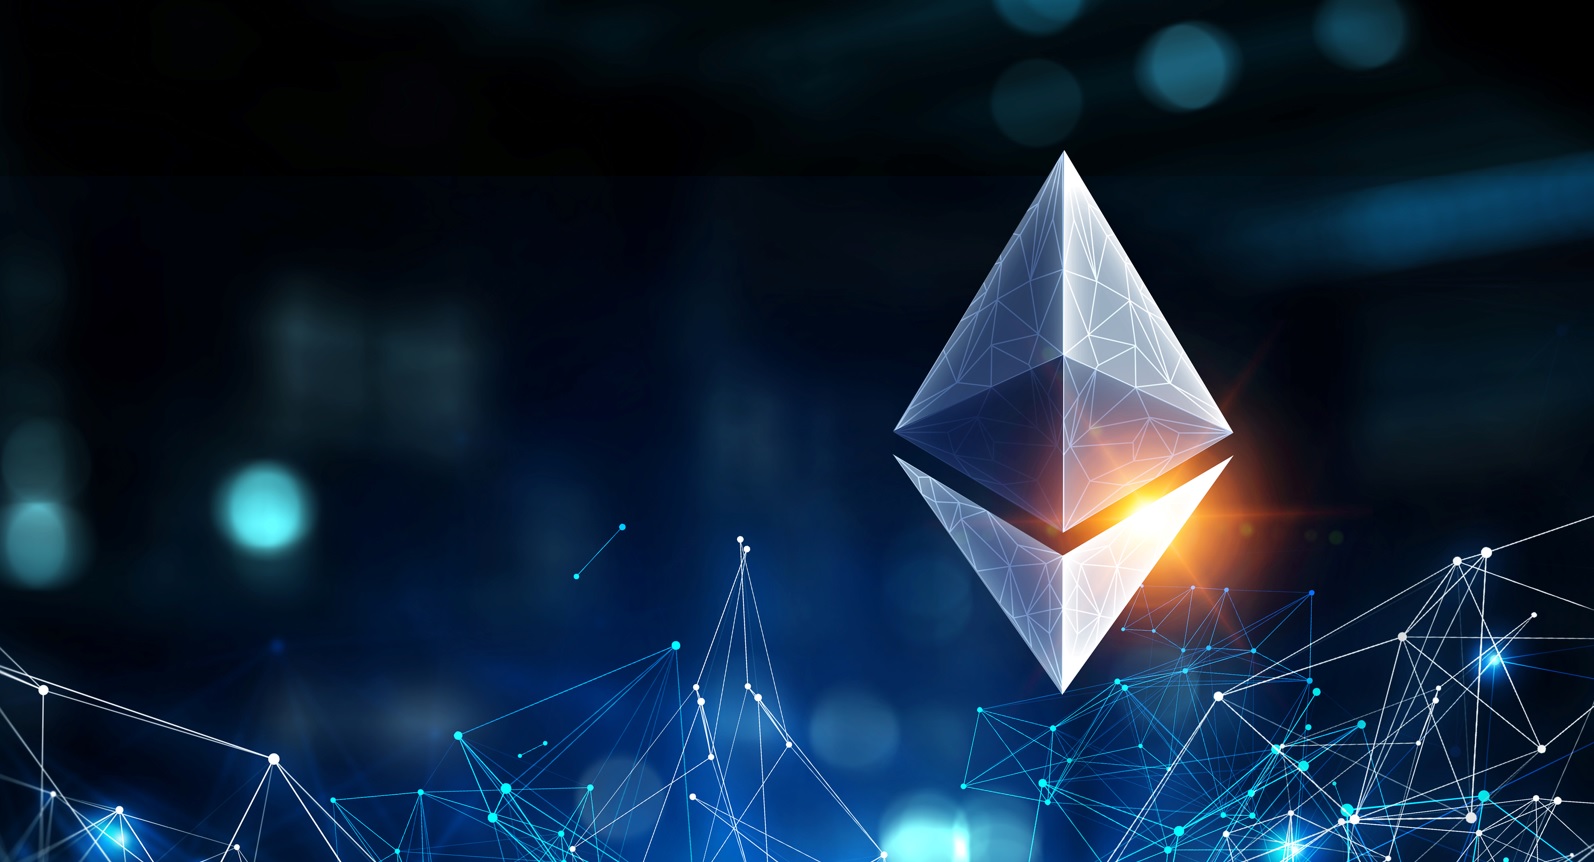  ethereum price likely 650 continued prediction channel 